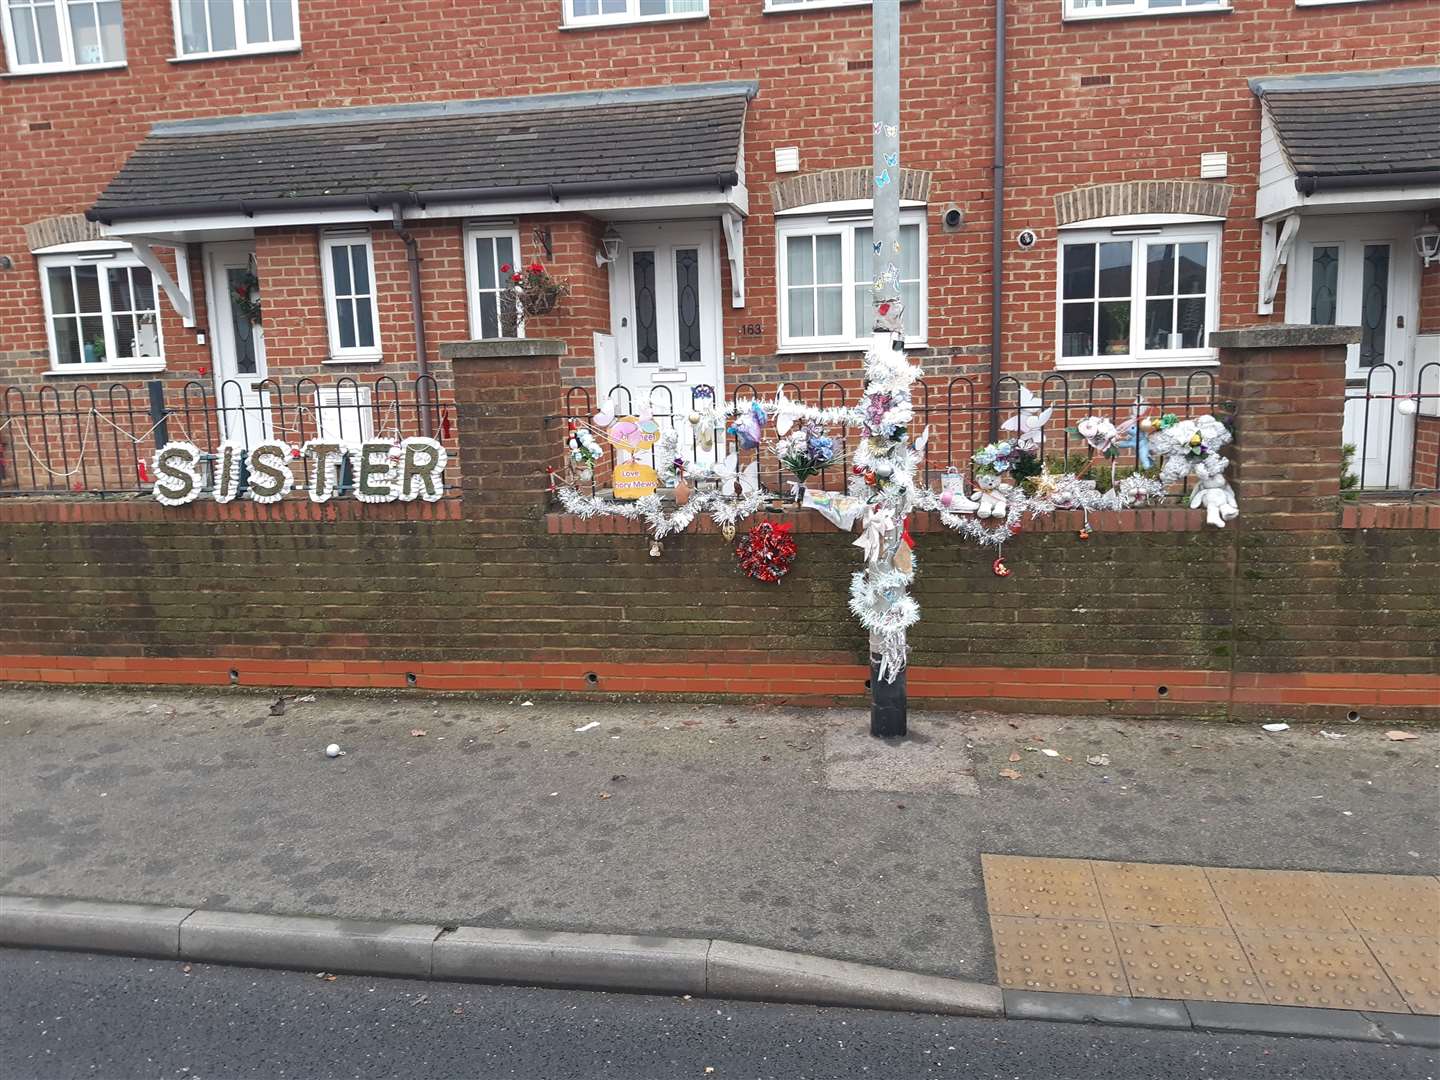 Christmas decorations have been put up in memory of Lily Lockwood who was hit and killed in Watling Street. Photo: Sean Delaney